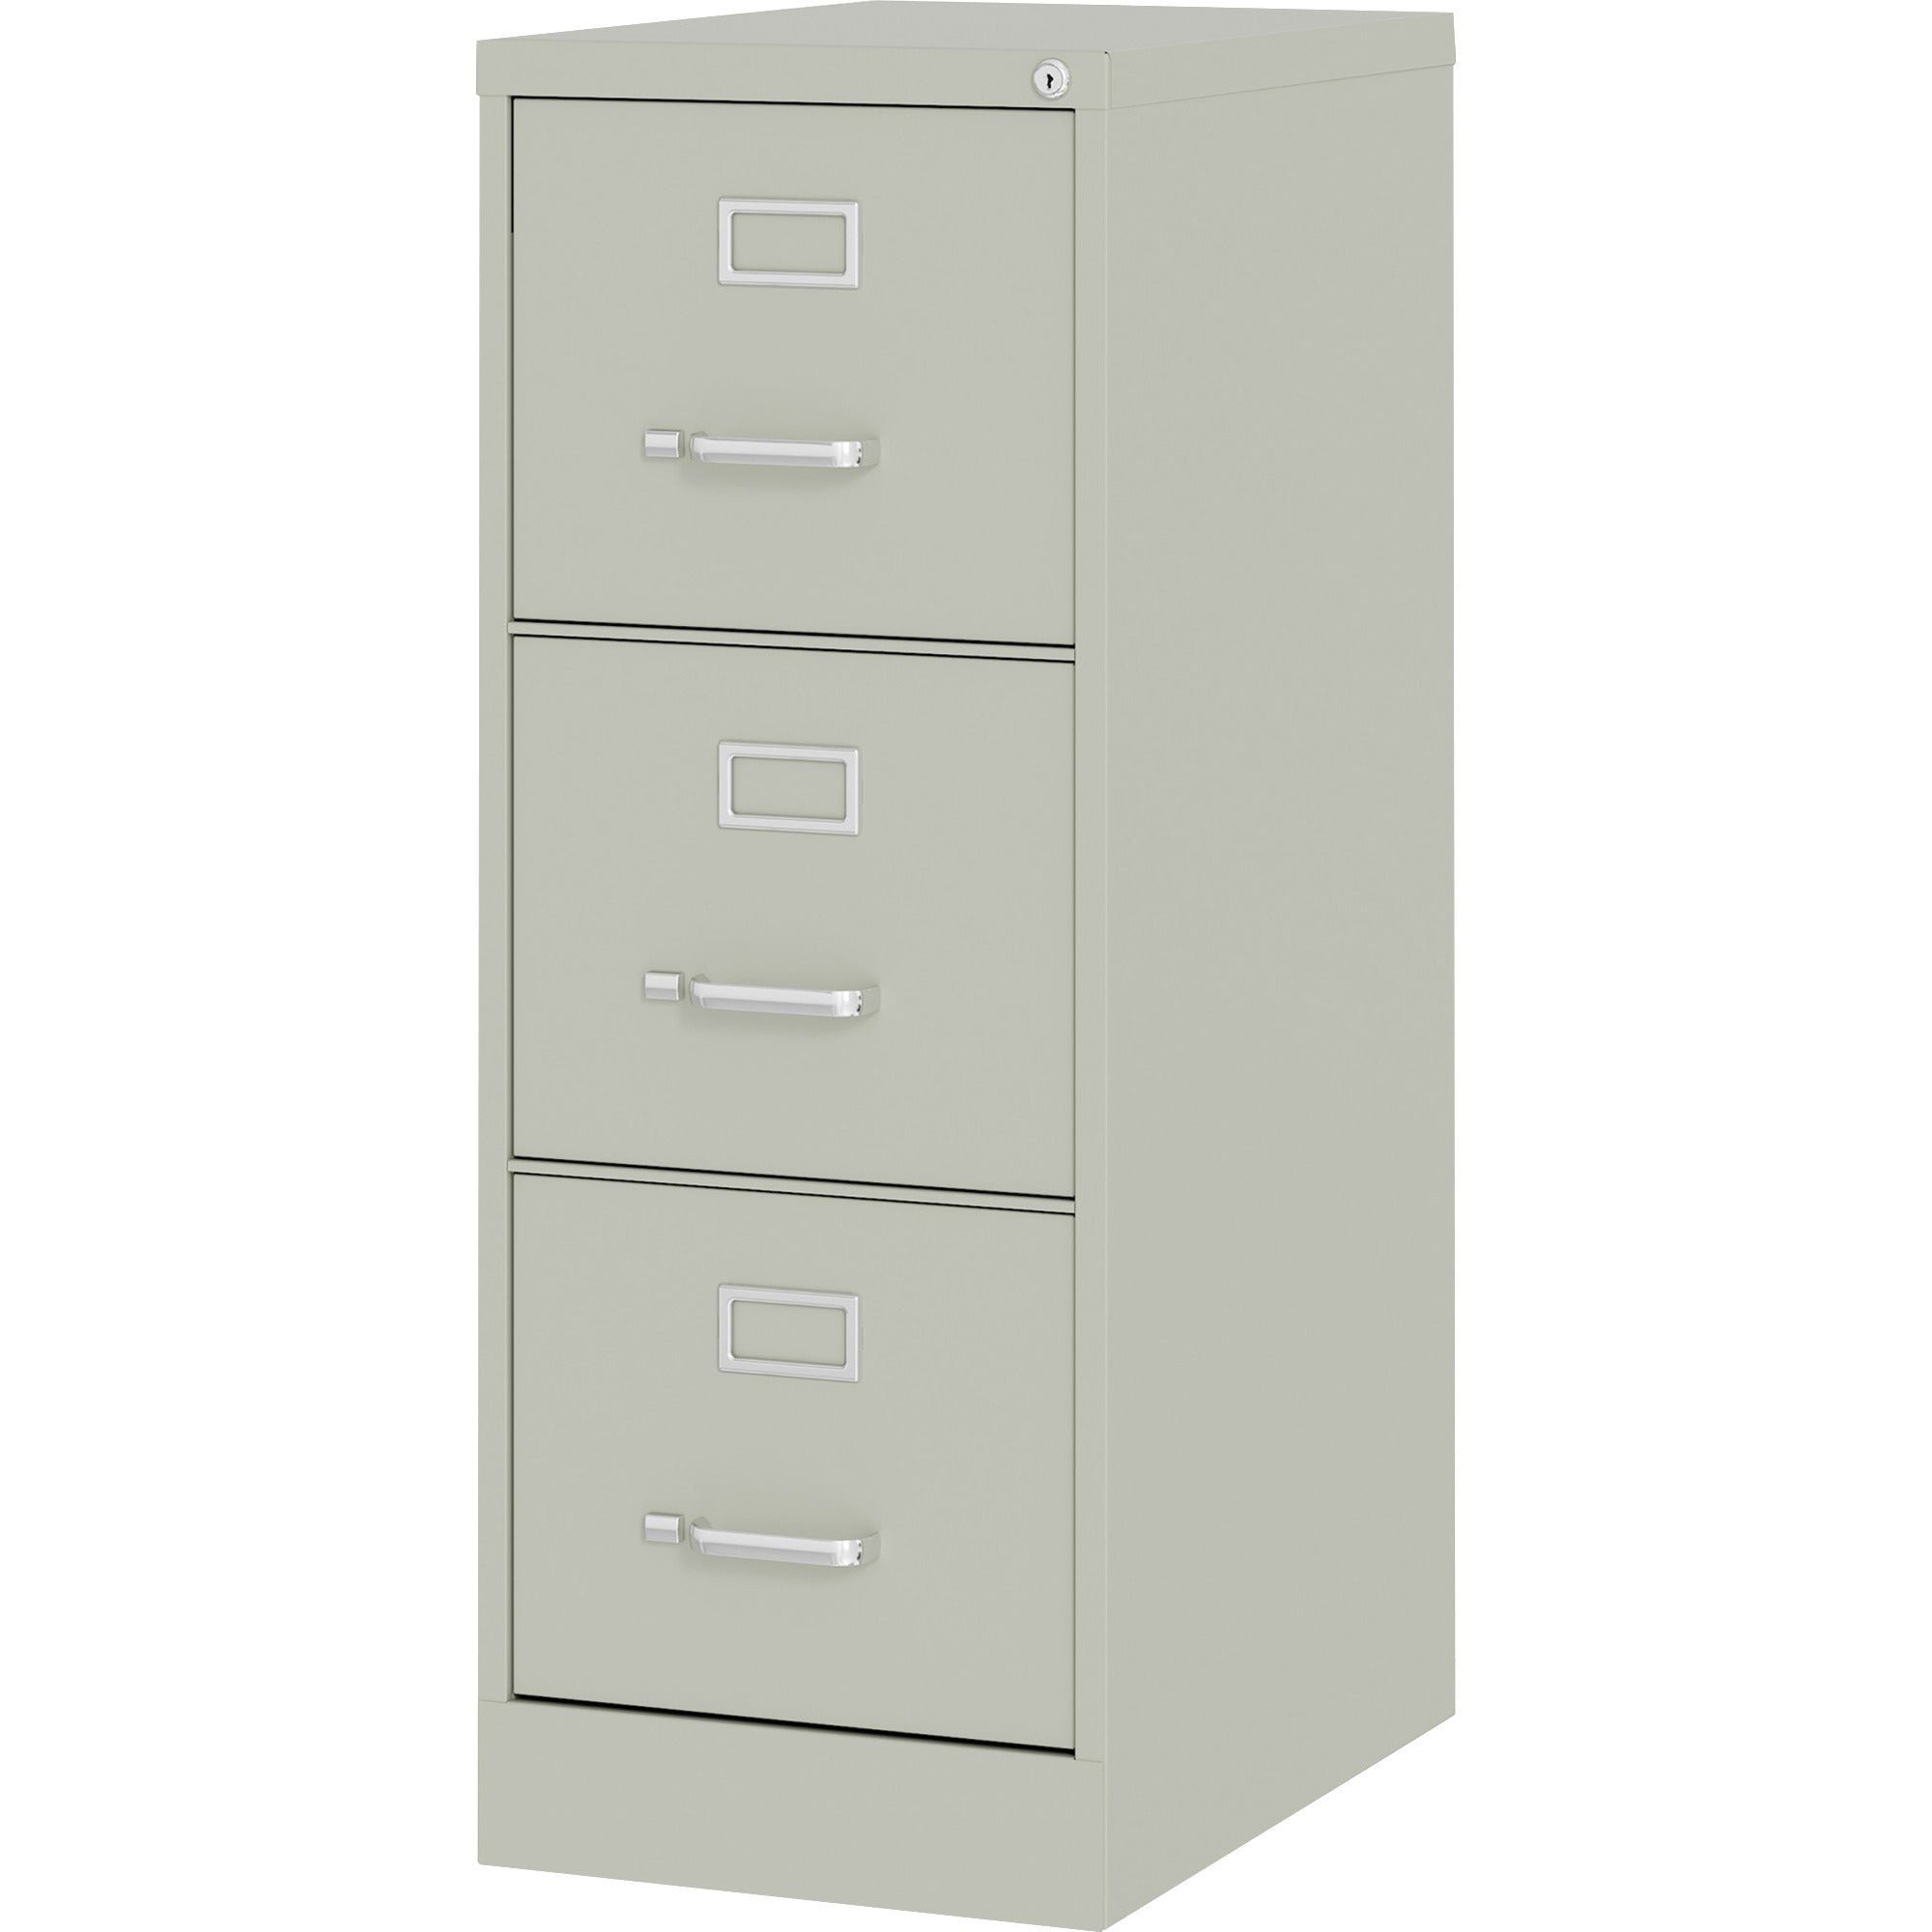 lorell-fortress-series-22-commercial-grade-vertical-file-cabinet-15-x-22-x-402-3-x-drawers-for-file-letter-vertical-ball-bearing-suspension-removable-lock-pull-handle-wire-management-light-gray-steel-recycled_llr42298 - 3